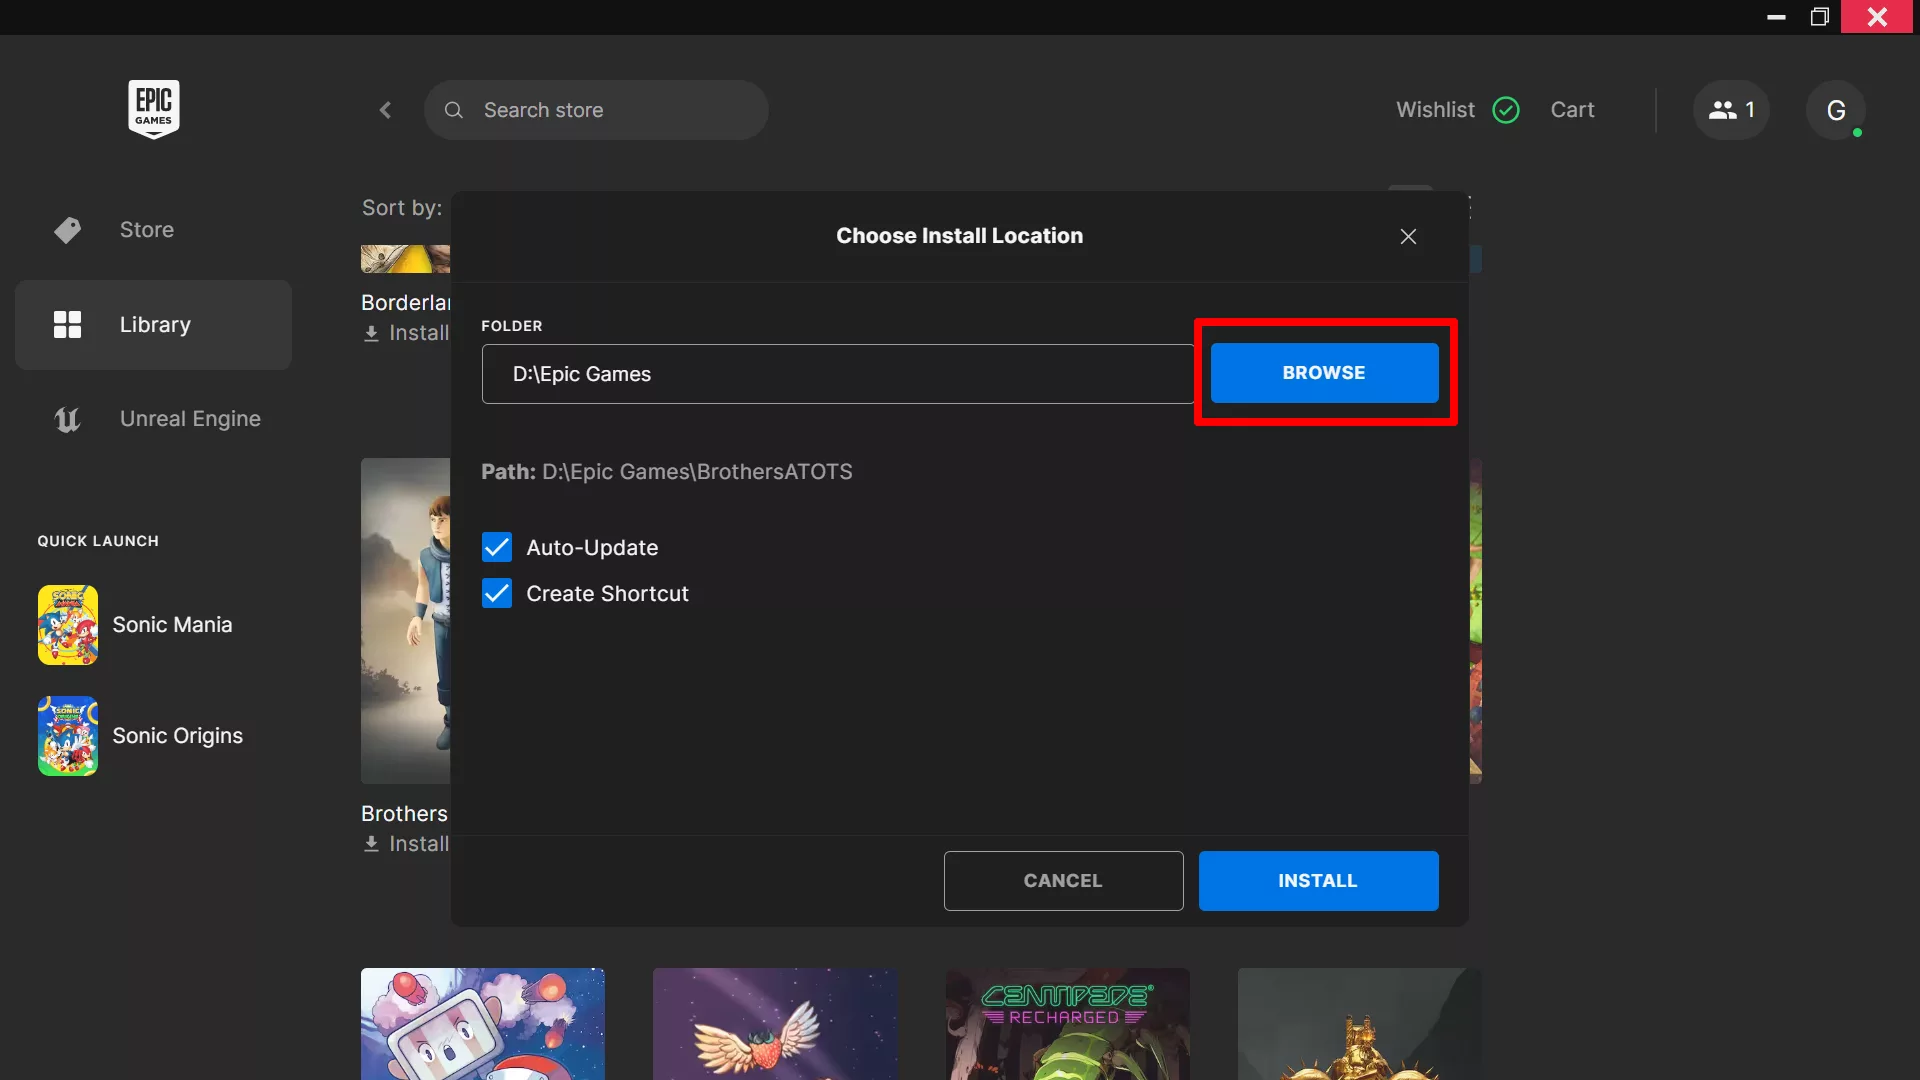 A screenshot of Epic Games' installation wizard, showing the ability to choose the install location.